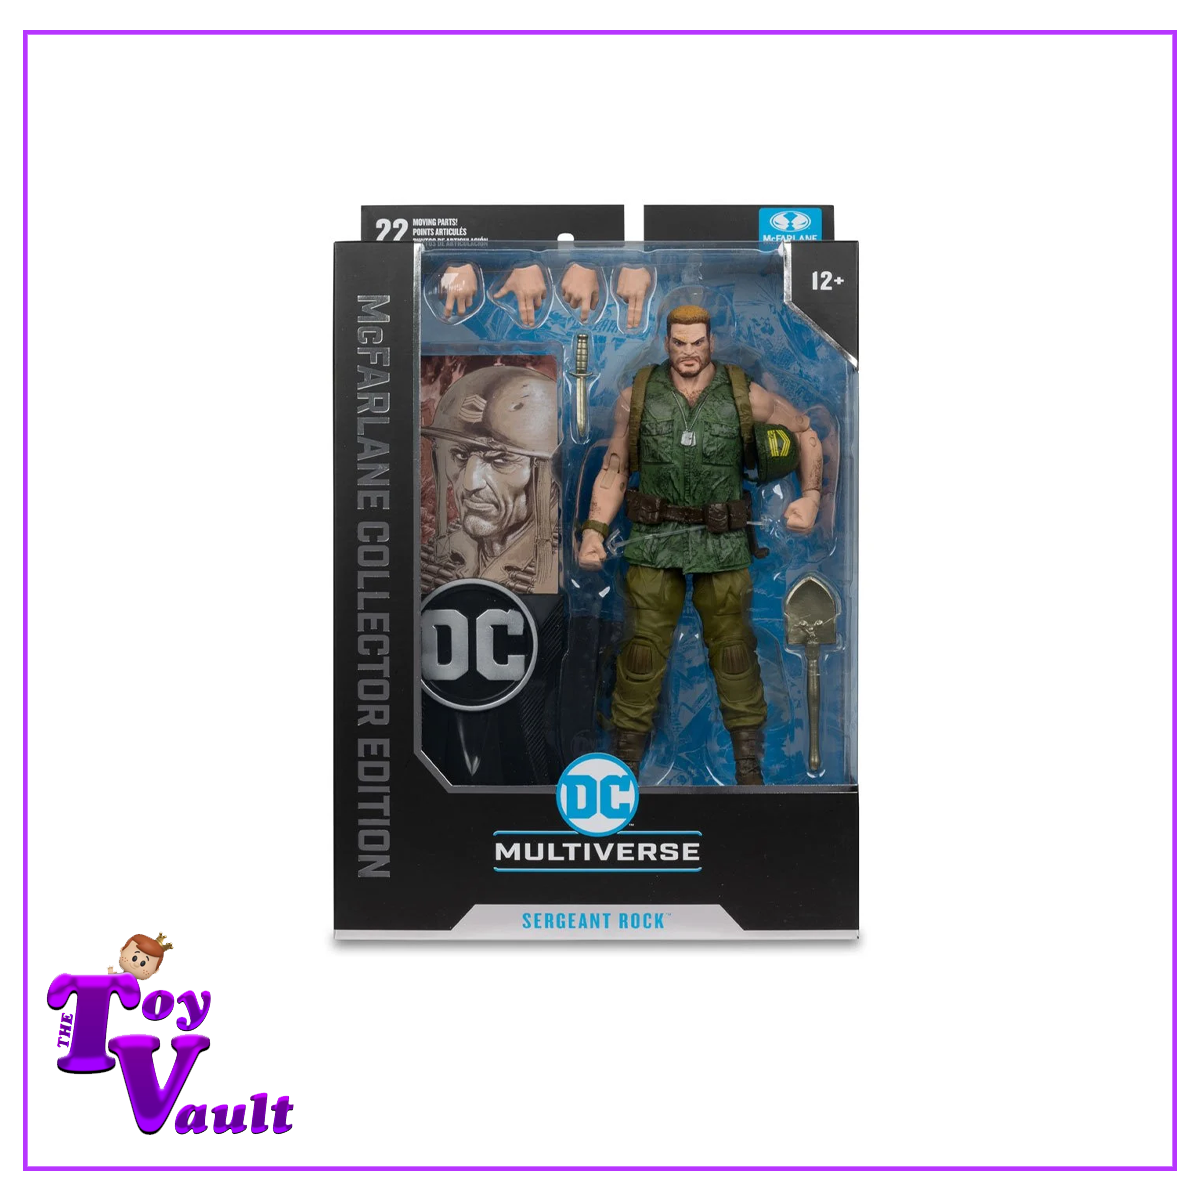 McFarlane Toys DC Heroes Multiverse Collector Edition Classics Wave 5 - Sergeant Rock 7-inch Action Figure Preorder